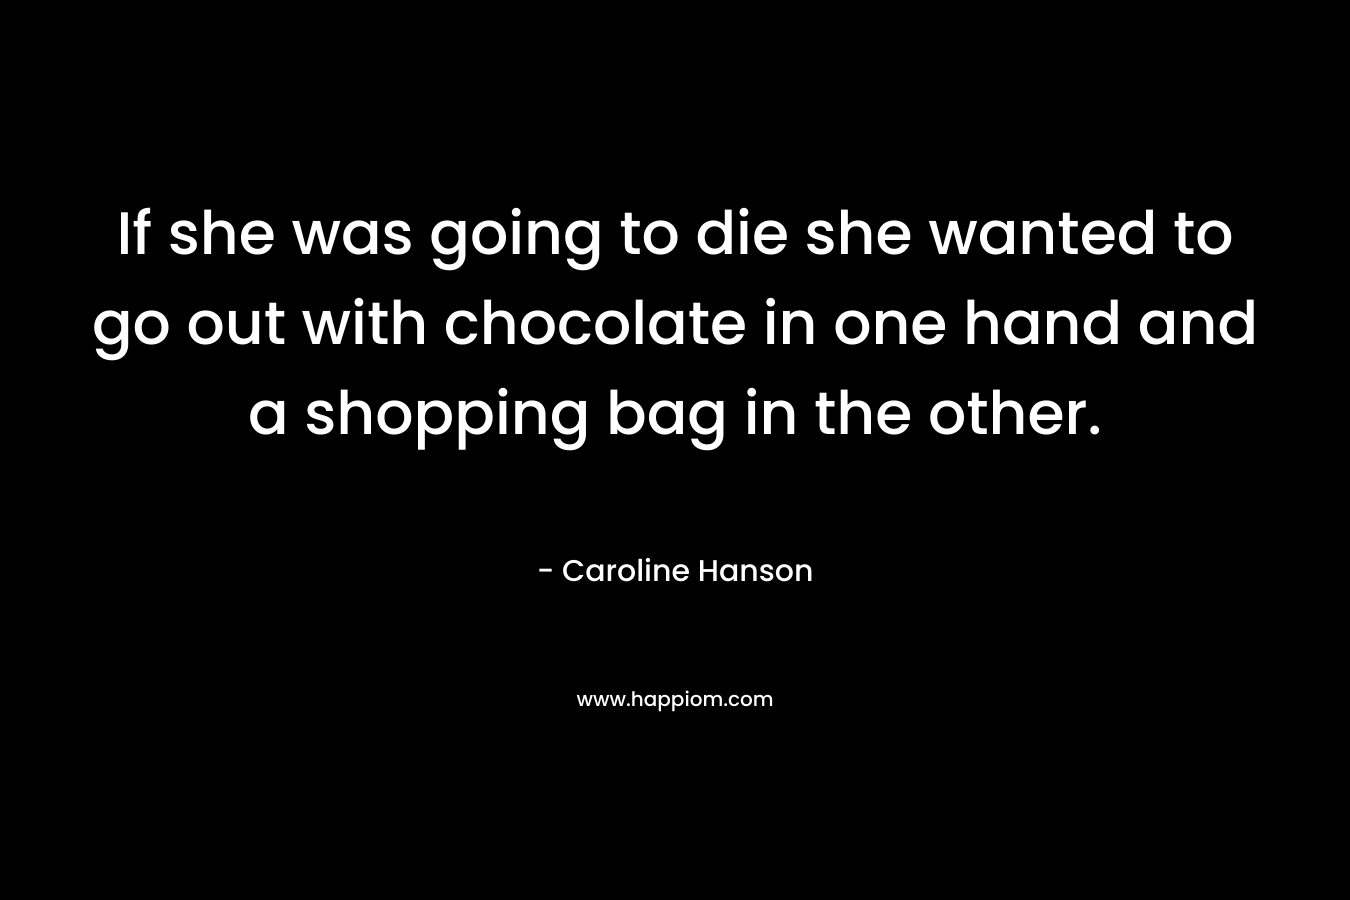 If she was going to die she wanted to go out with chocolate in one hand and a shopping bag in the other. – Caroline Hanson